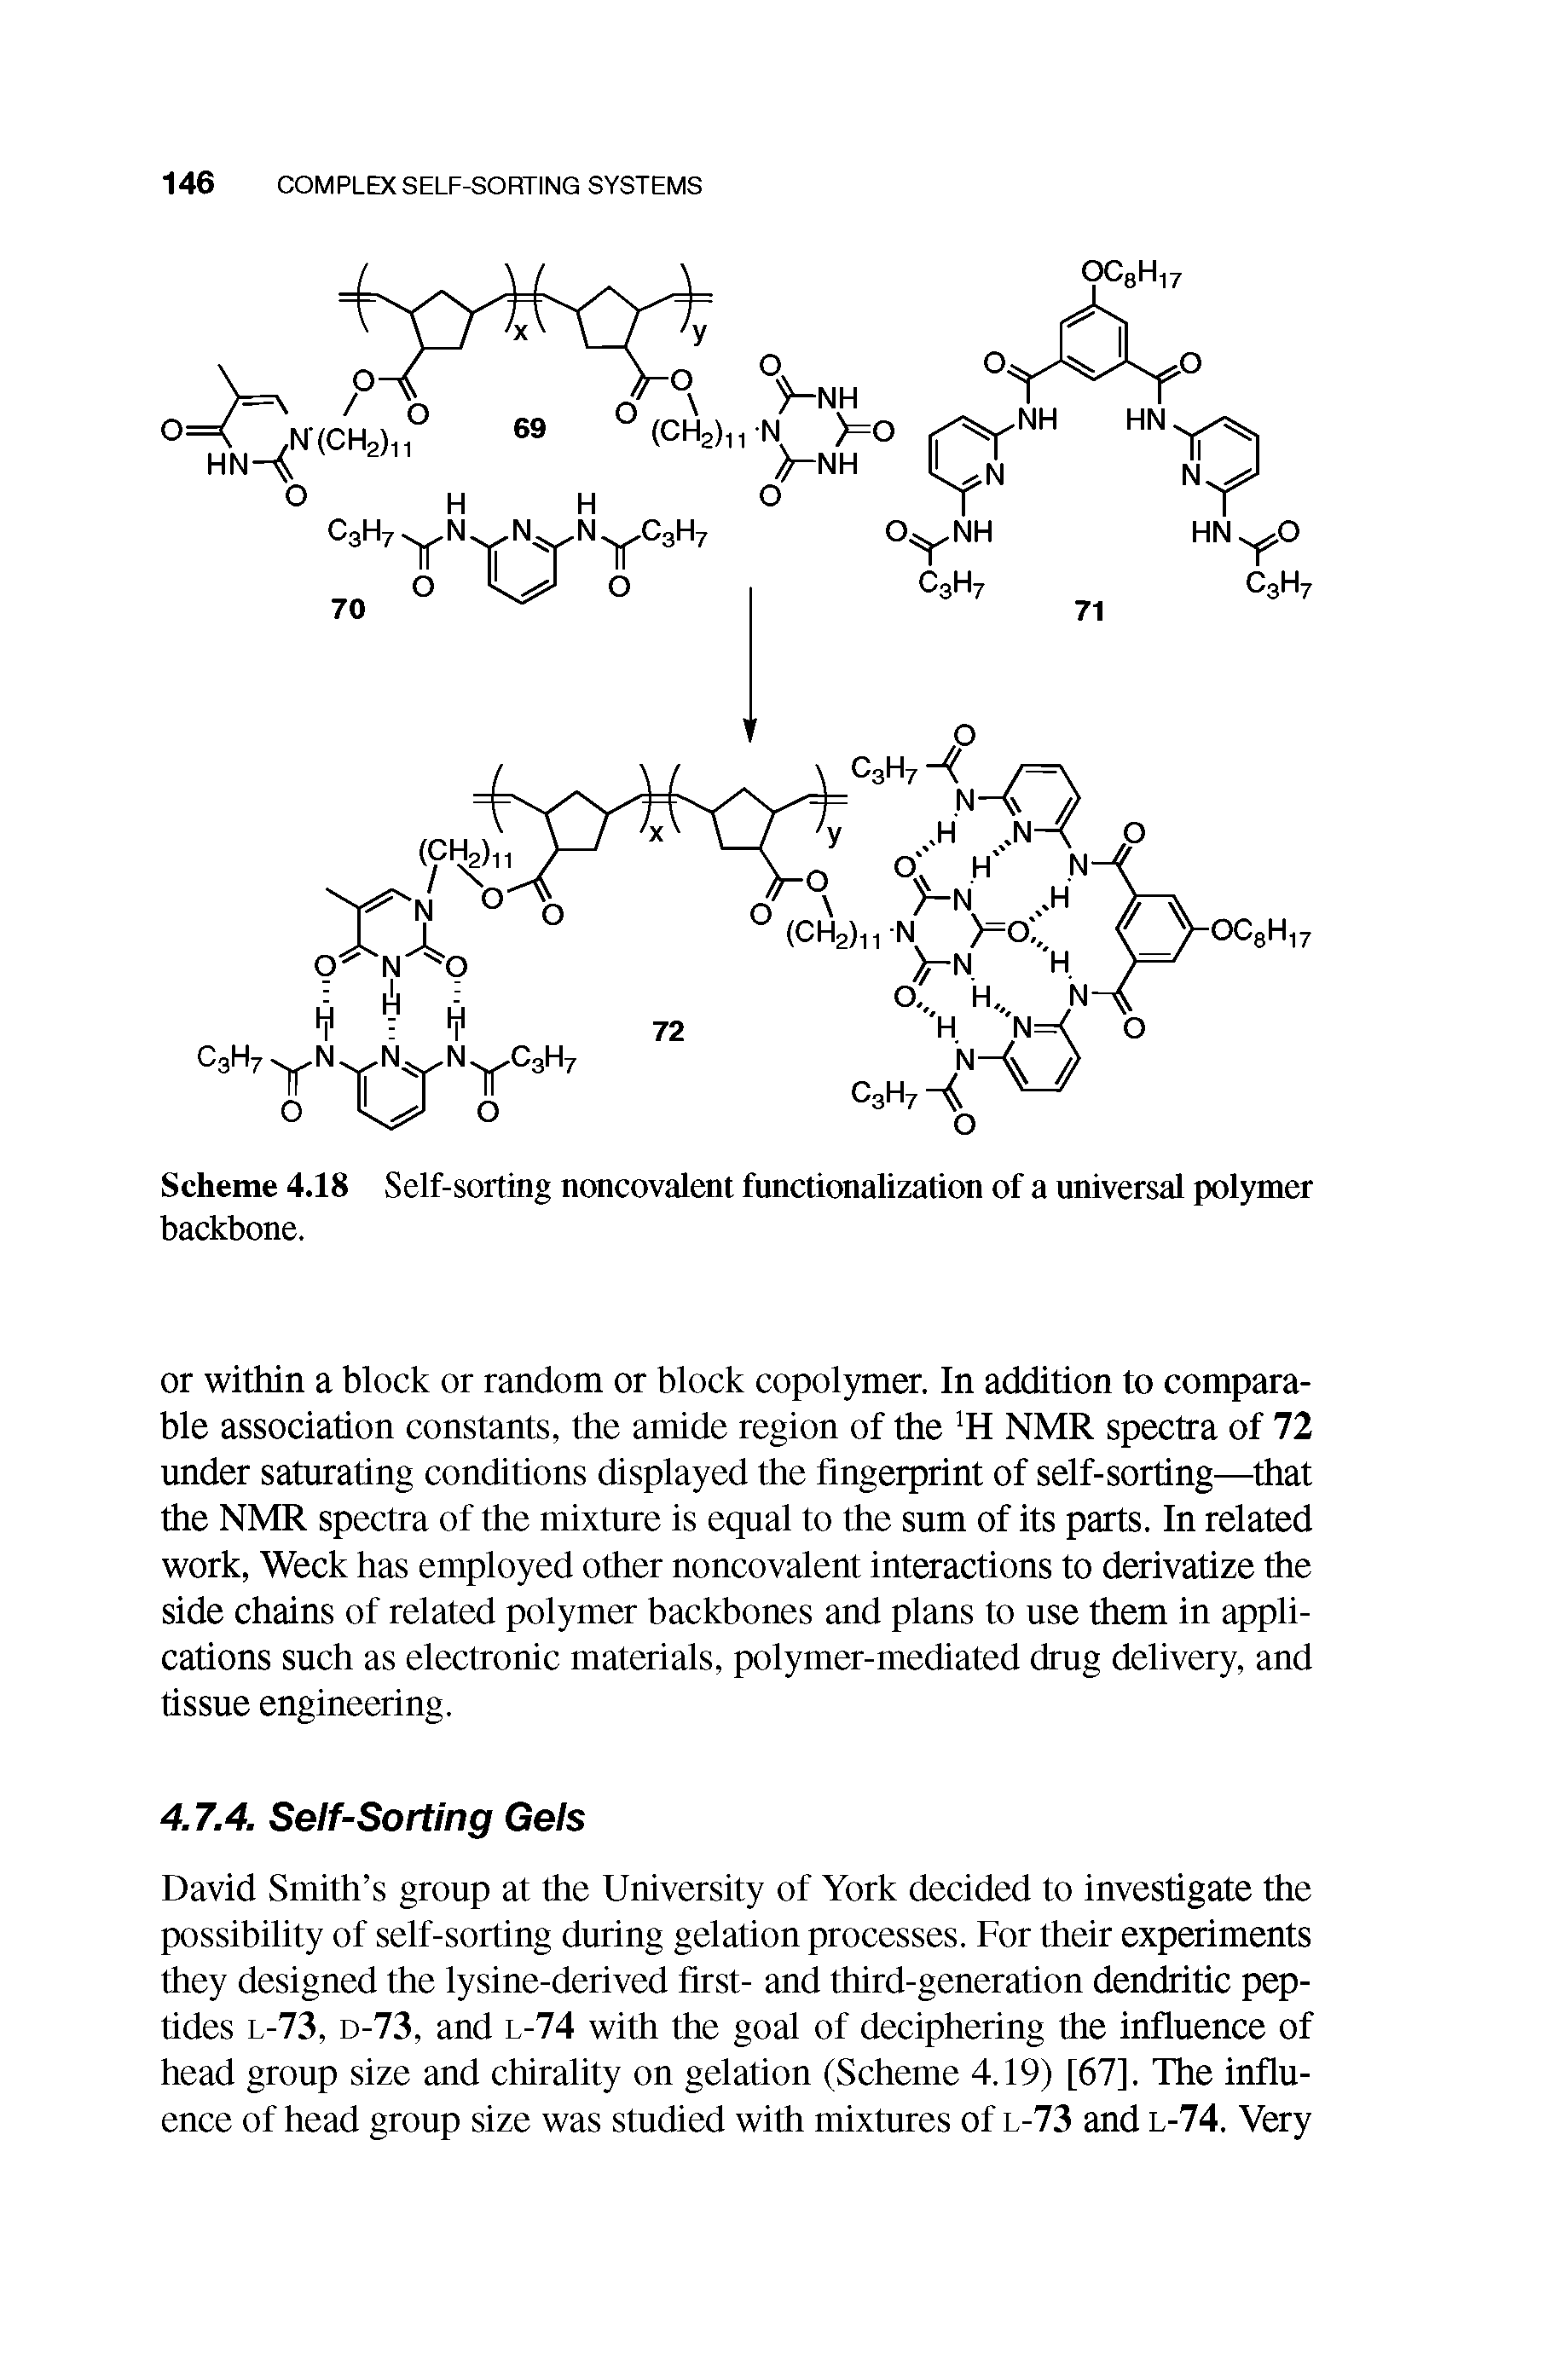 Scheme 4.18 Self-sorting noncovalent functionalization of a universal polymer backbone.